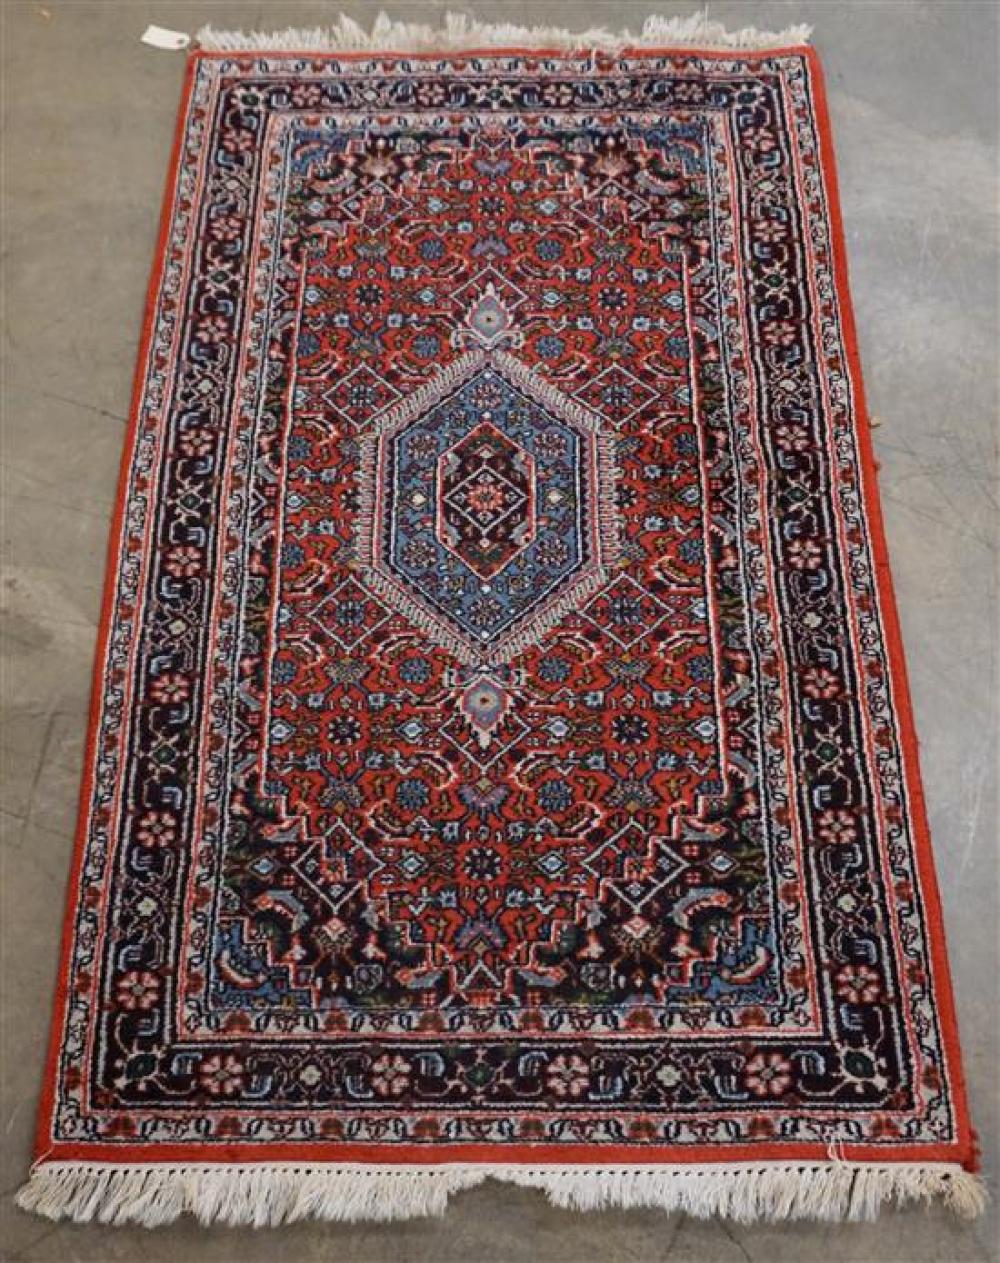 INDO SARABAND RUG 5 FT 3 IN X 32174f